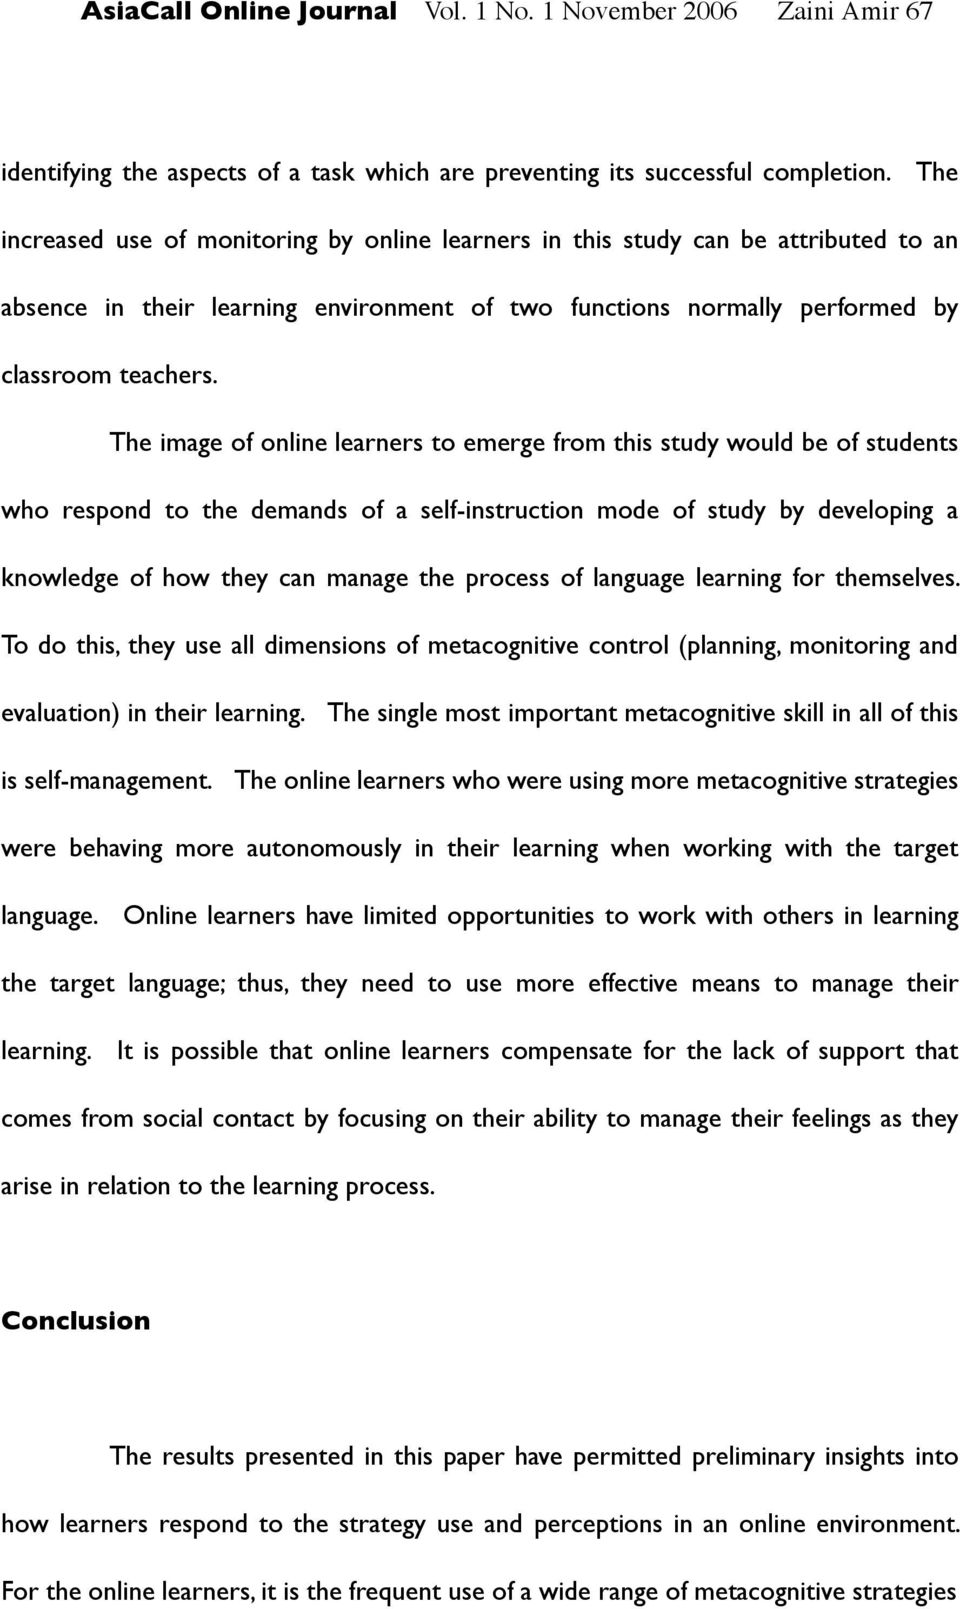 The image of online learners to emerge from this study would be of students who respond to the demands of a self-instruction mode of study by developing a knowledge of how they can manage the process